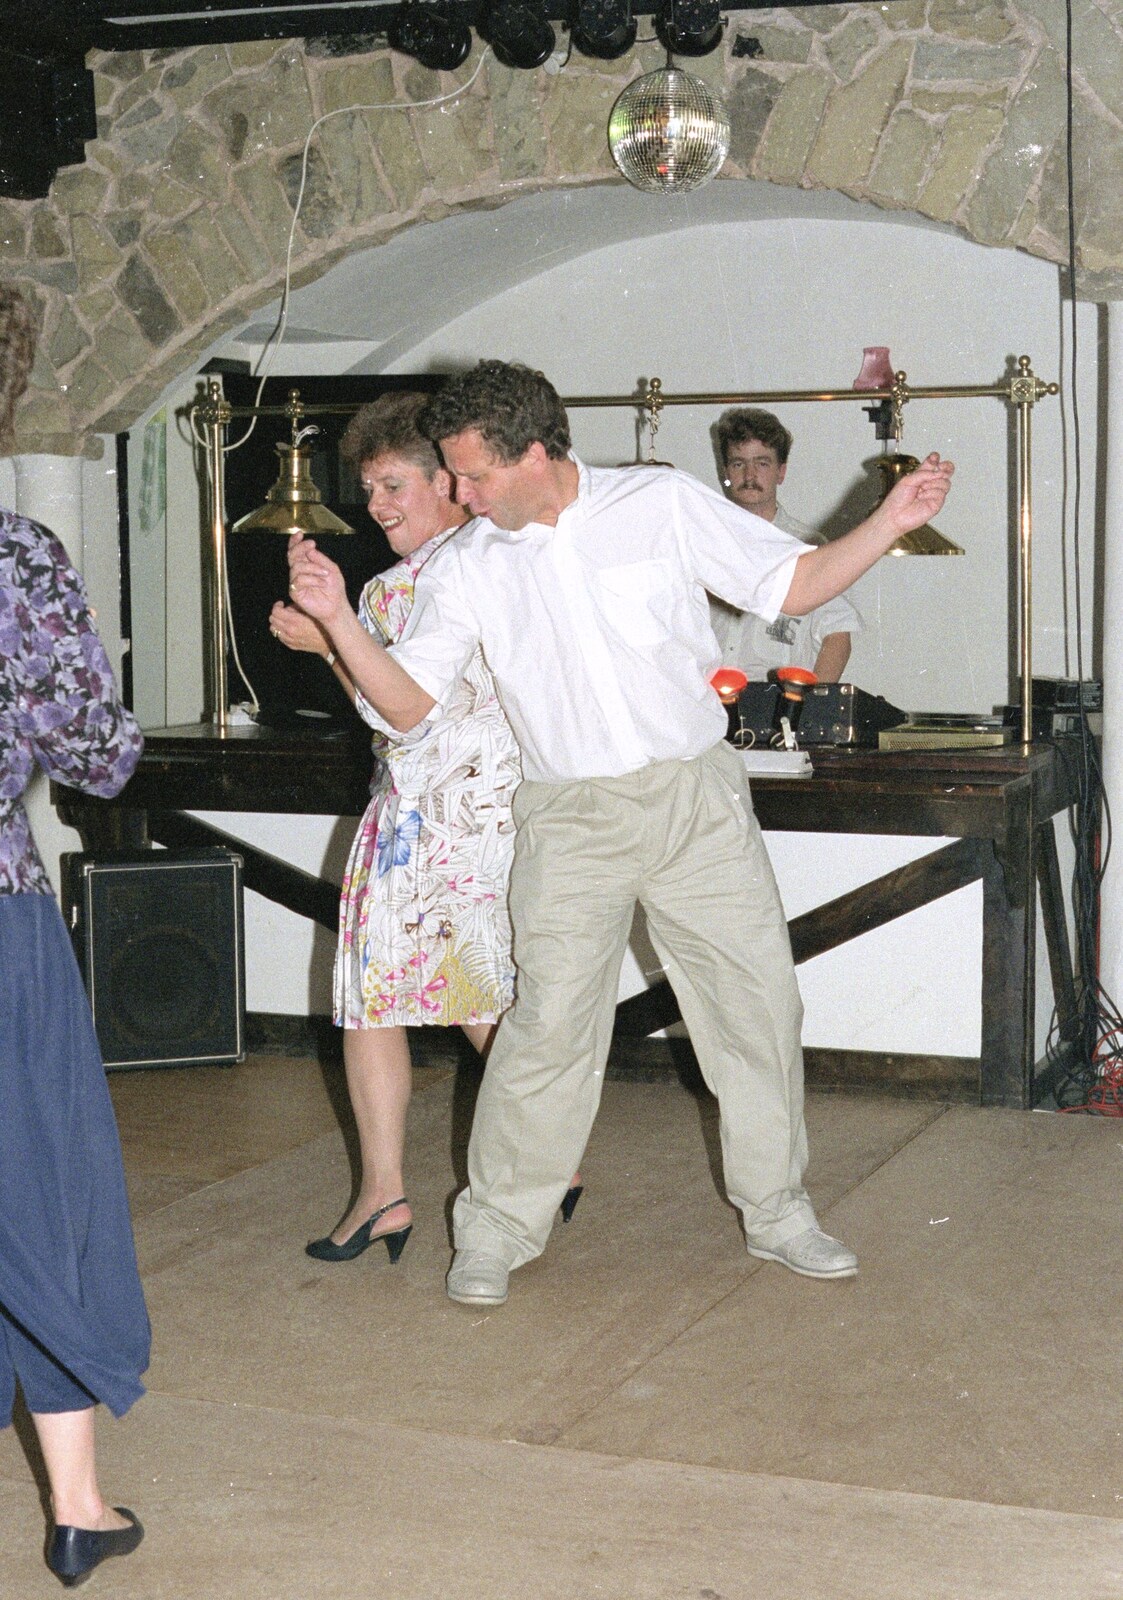 Funky dance moves from Crispy and Bob from Printec and Steve-O's Pants, The Swan, Harleston, Norfolk - 19th May 1990